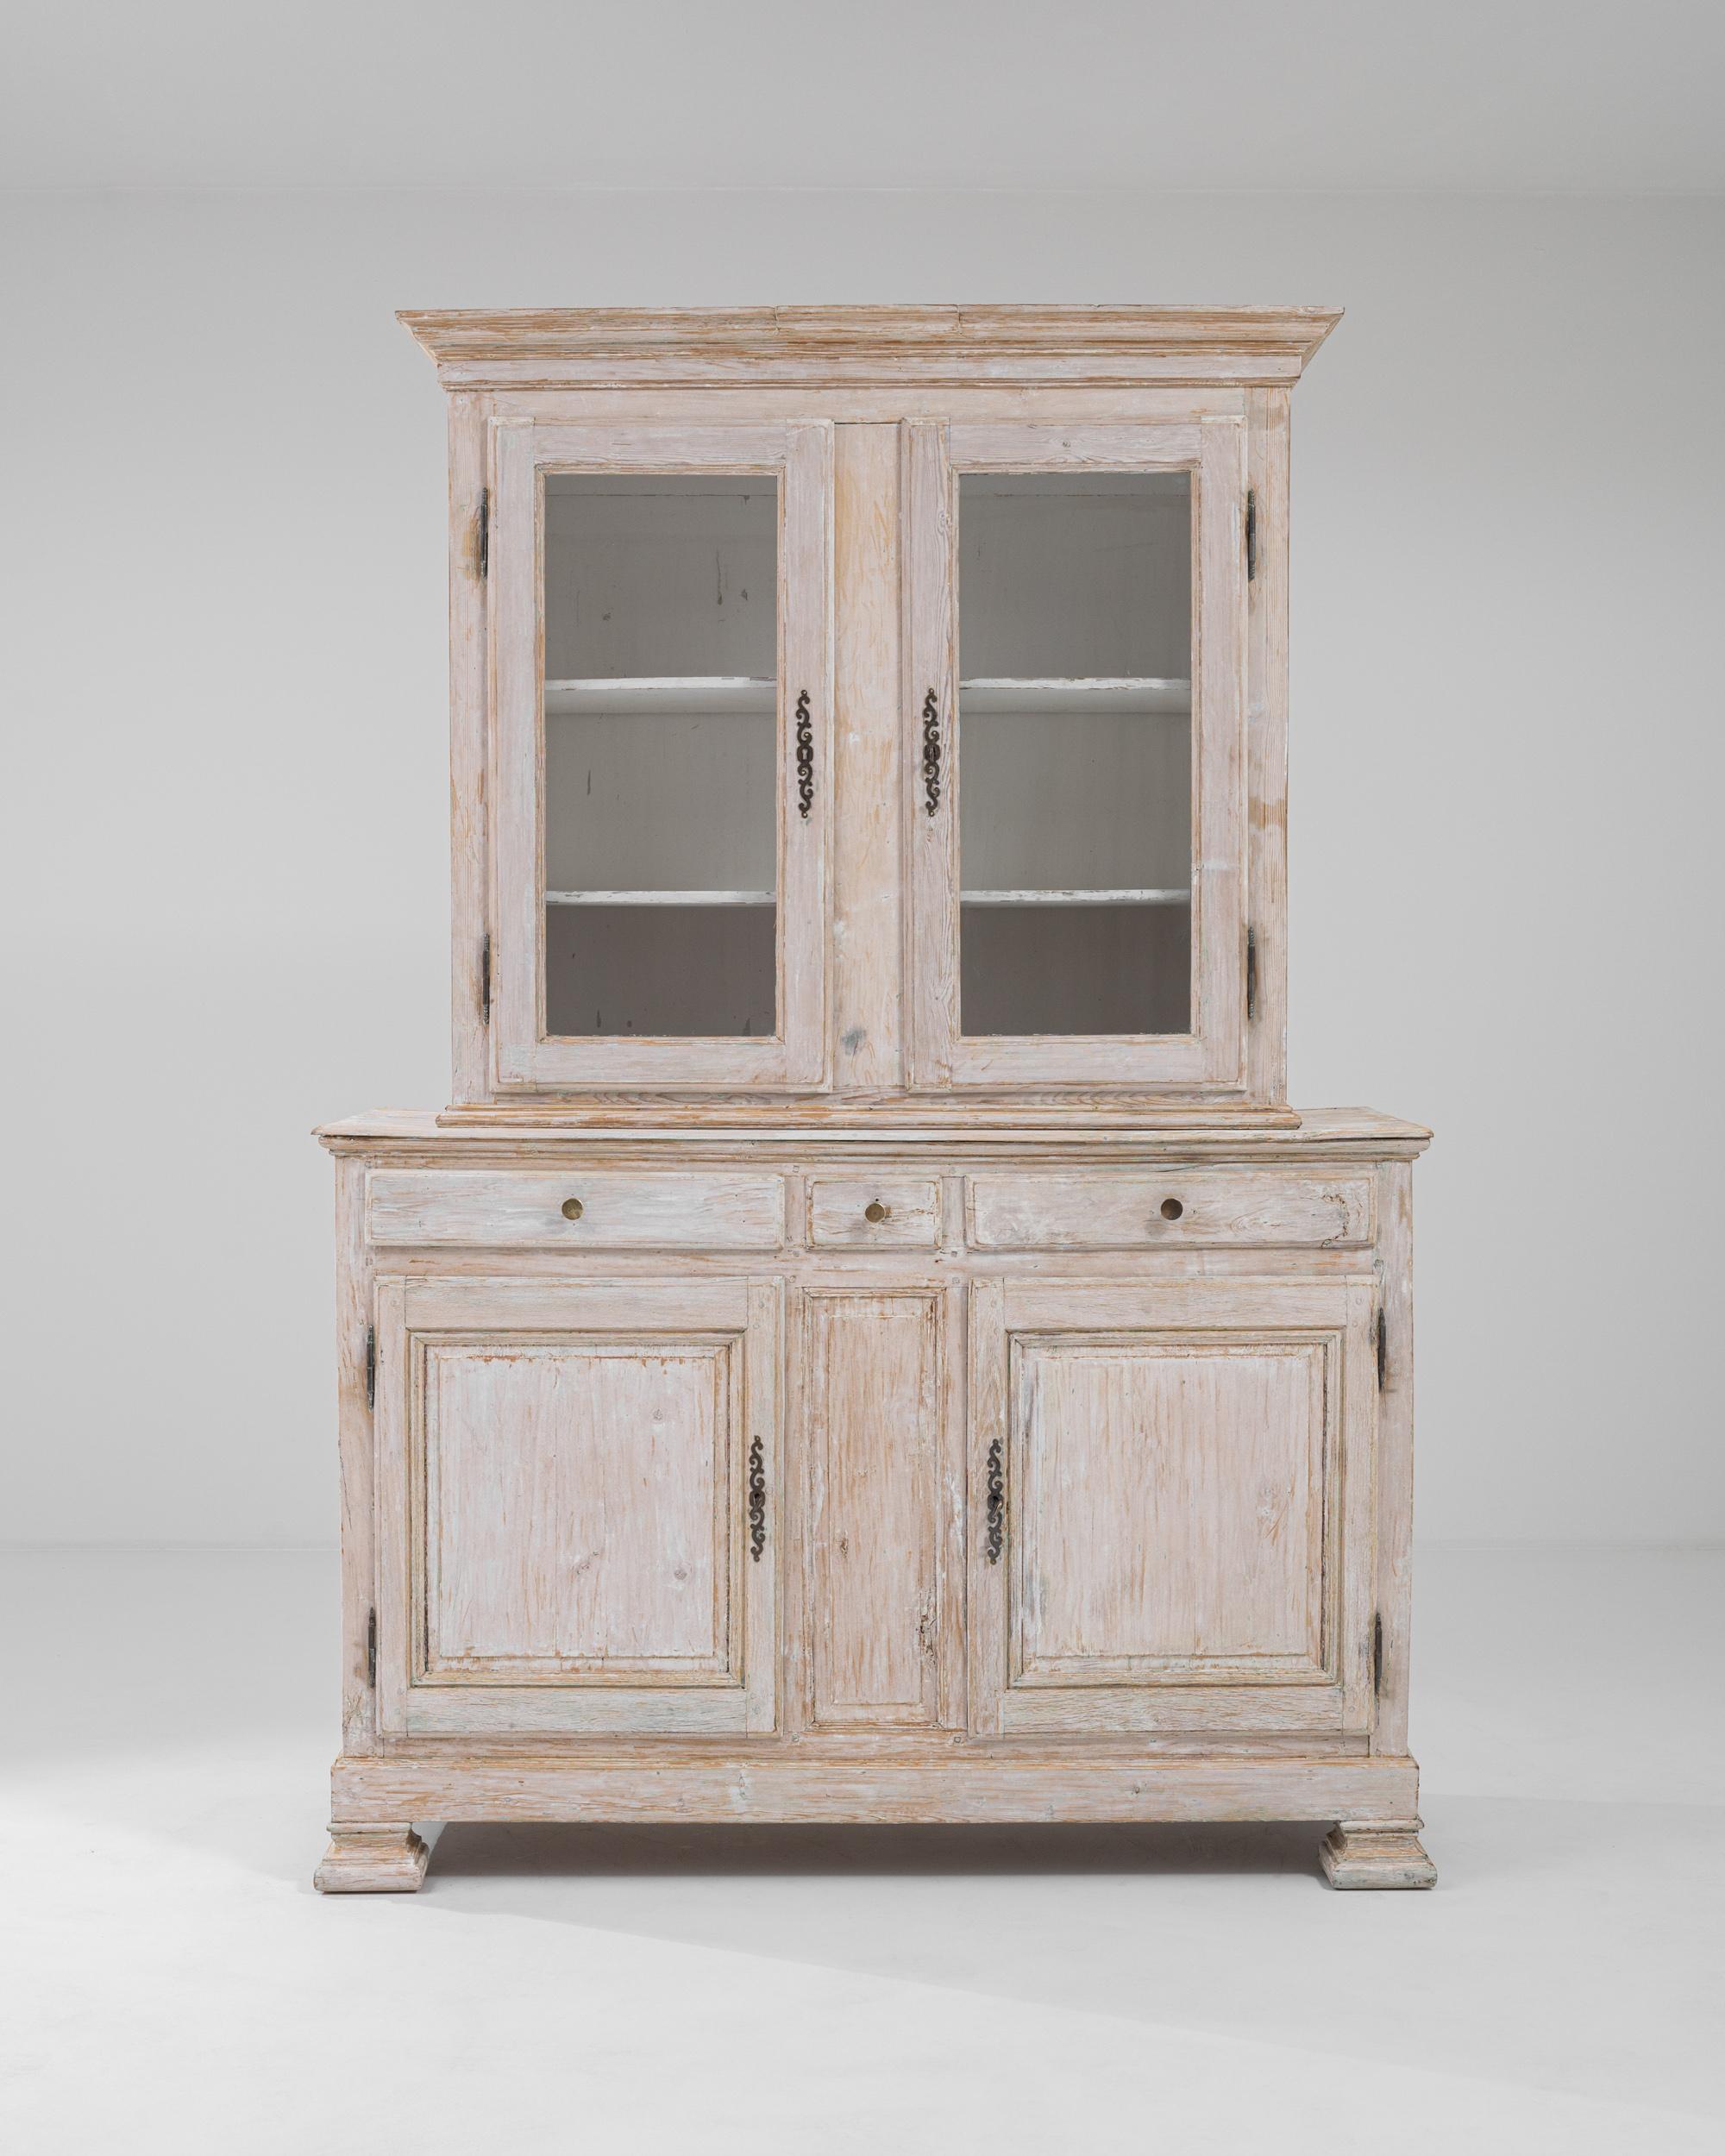 A timeworn patina gives this antique vitrine an air of romance. Built in France in the 1800s, the silhouette has a Provincial simplicity, graceful yet unadorned. The windows of the cabinet give a view onto a set of shelves, which would likely